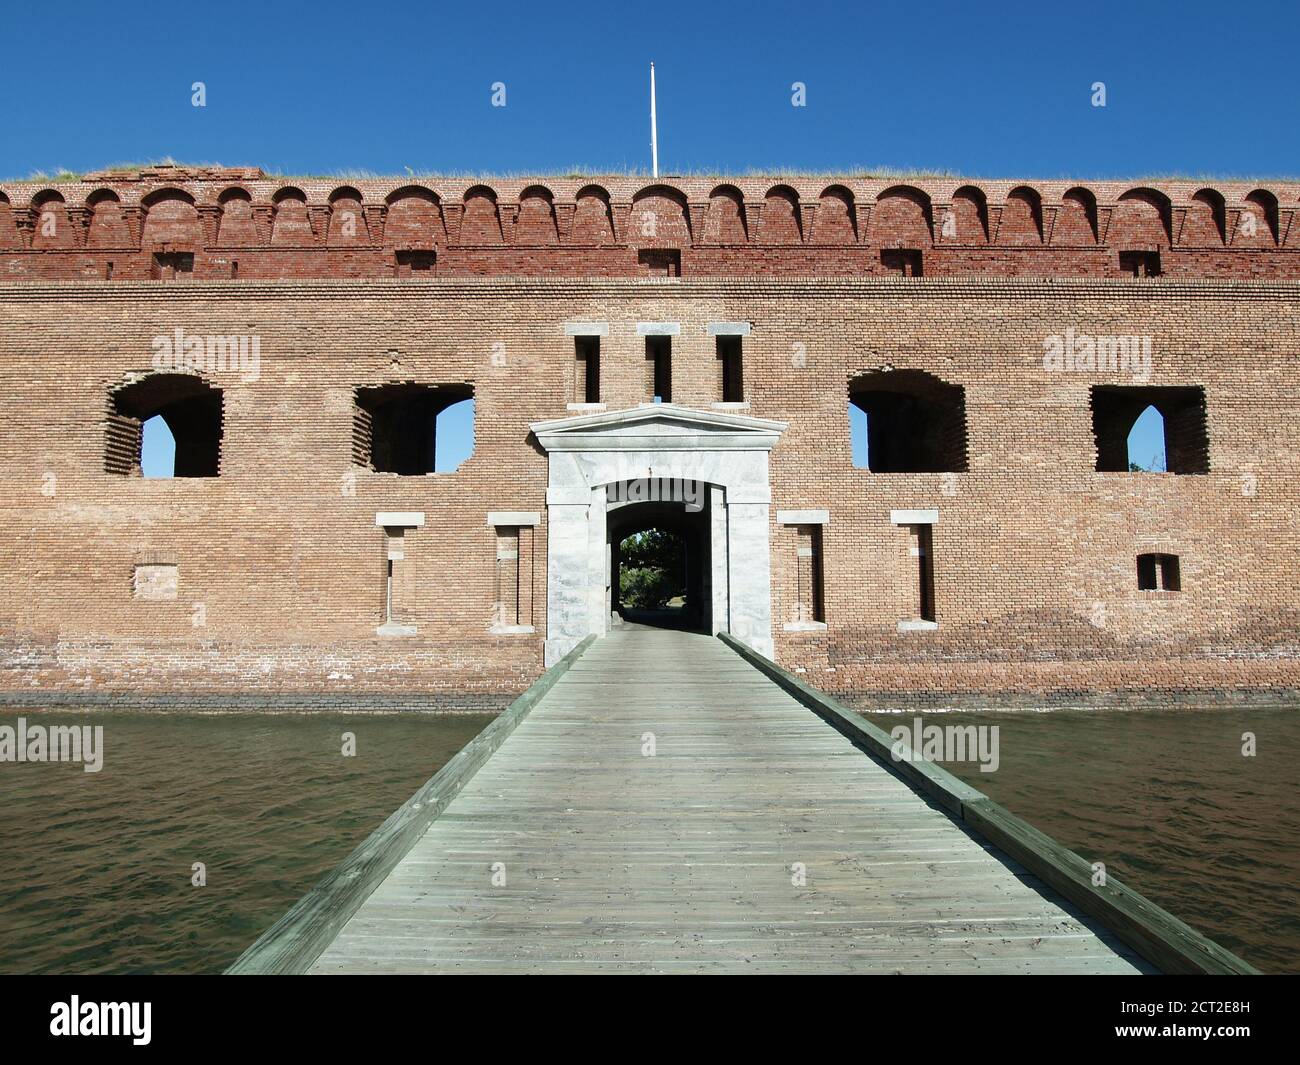 Entrance to Fort Jefferson at Dry Tortugas National Park in the Florida Keys. Stock Photo